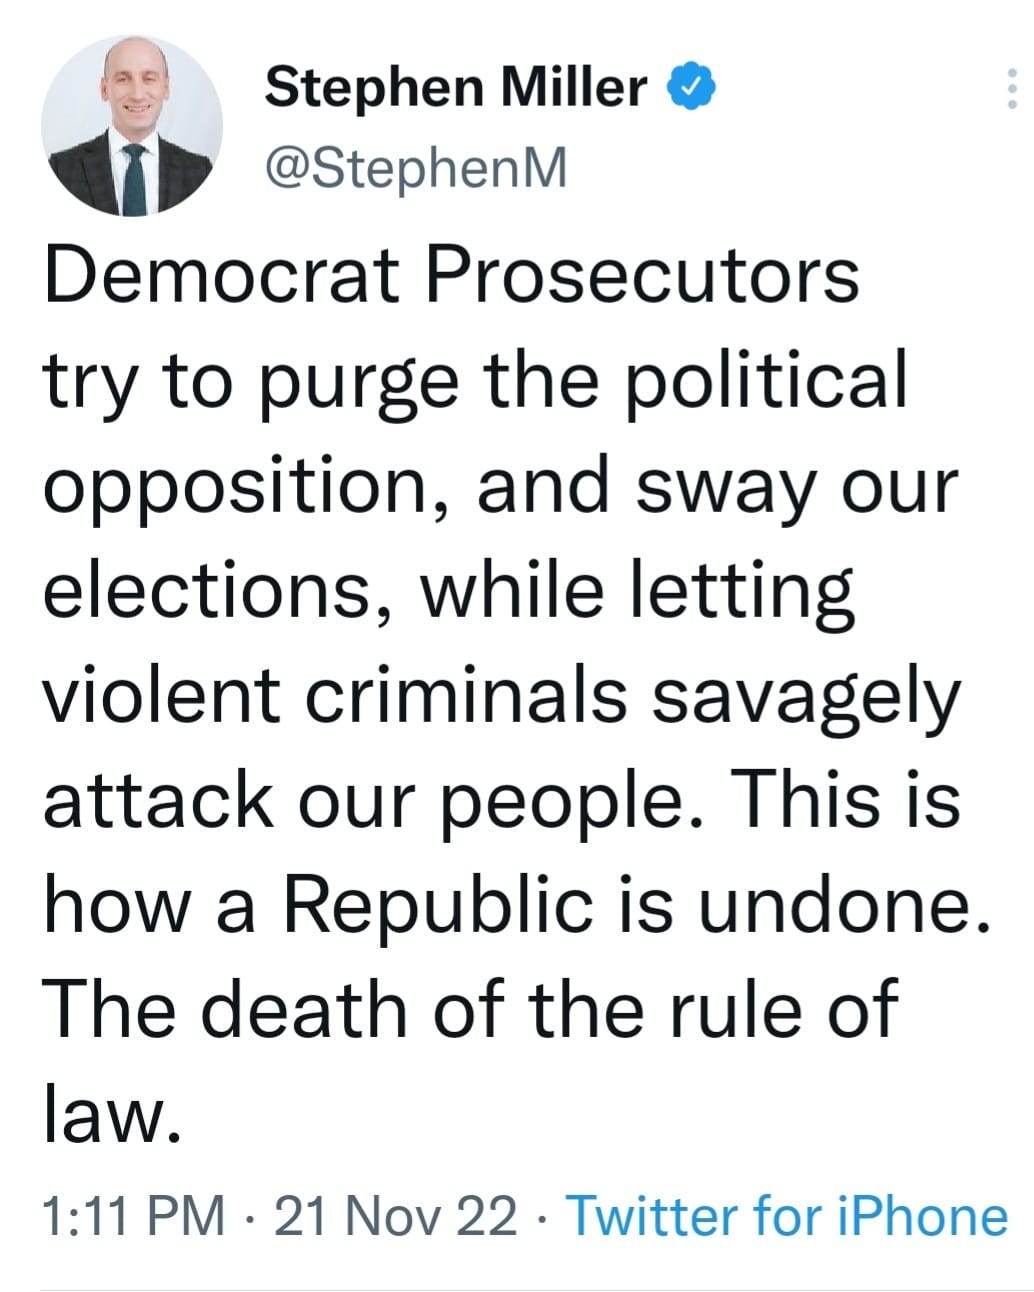 May be an image of 1 person and text that says 'Stephen Miller @StephenM Democrat Prosecutors try to purge the political opposition, and sway our elections, while letting violent criminals savagely attack our people. This is how a Republic is undone. The death of the rule of law. 1:11 PM 21 Nov 22. Twitter for iPhone'